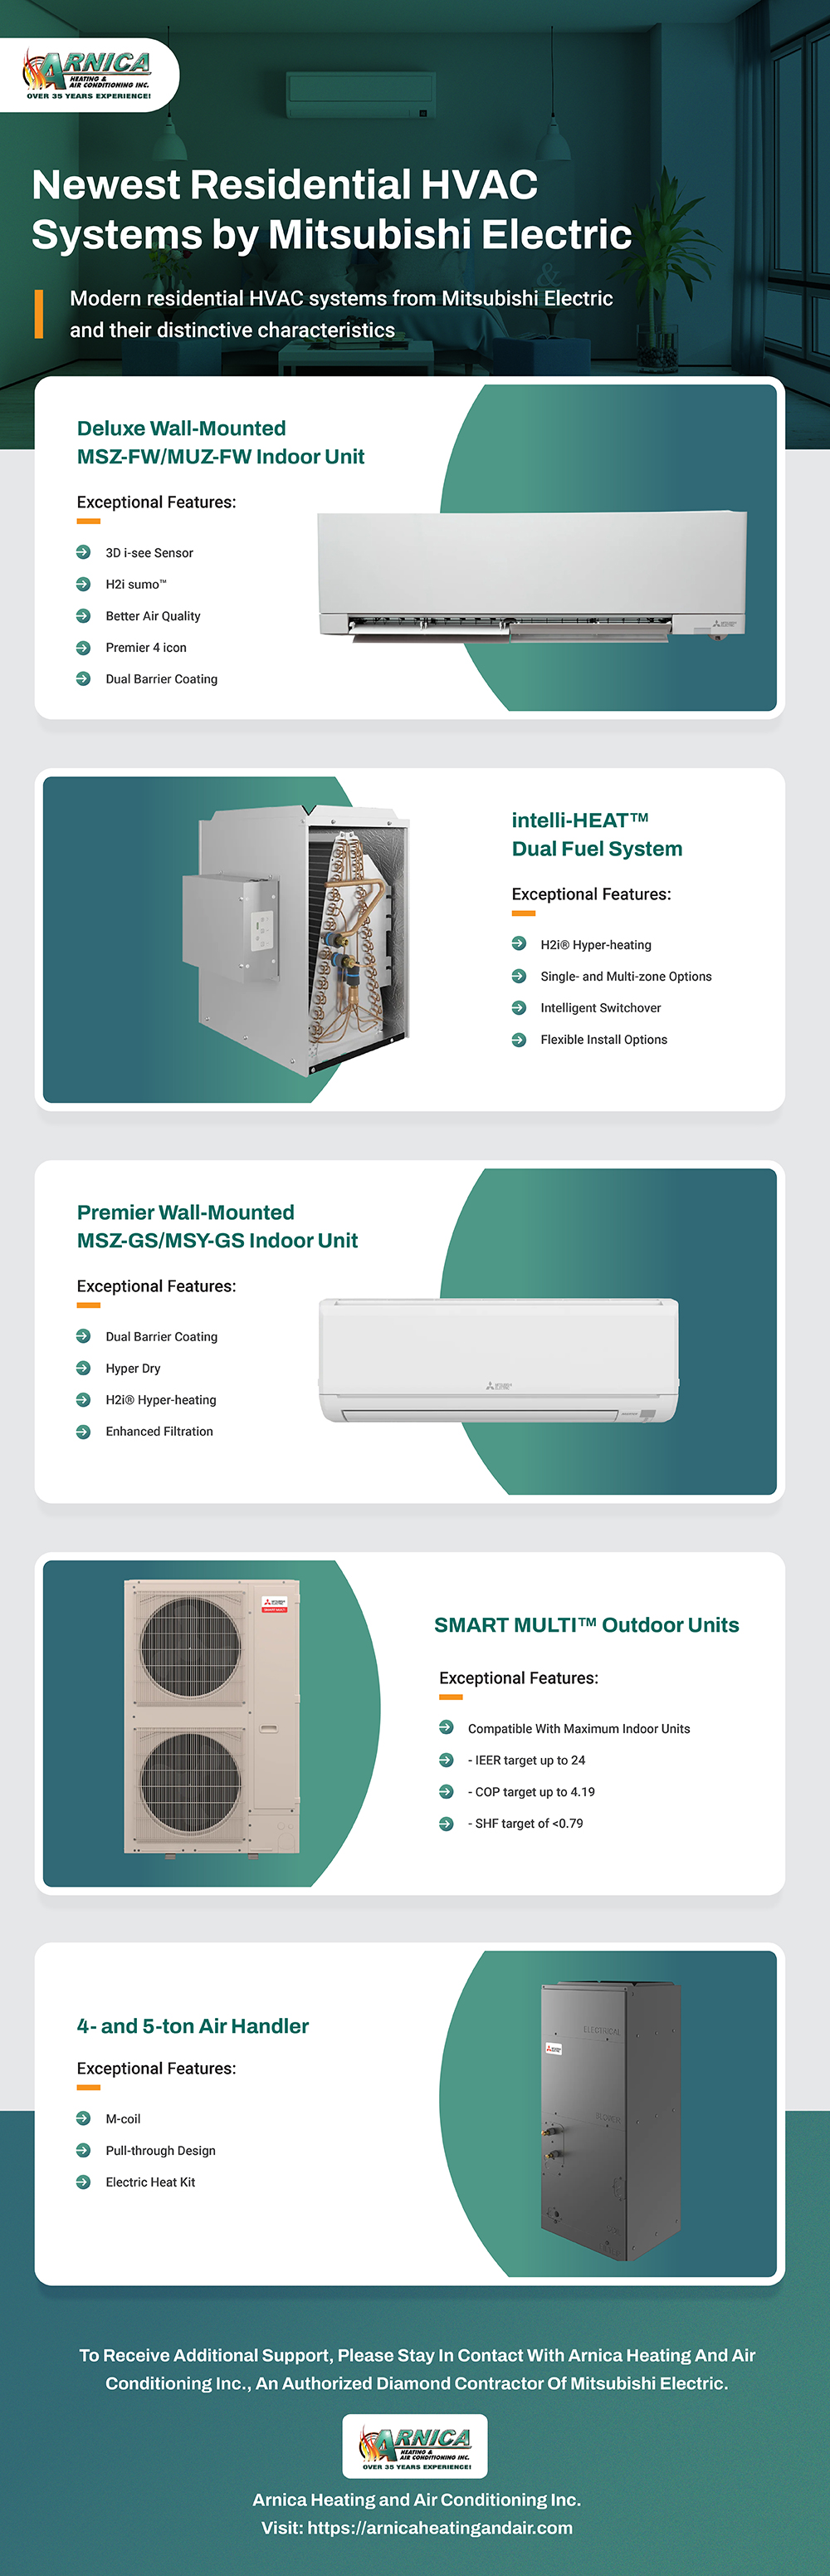 Newest Residential HVAC Systems by Mitsubishi Electric